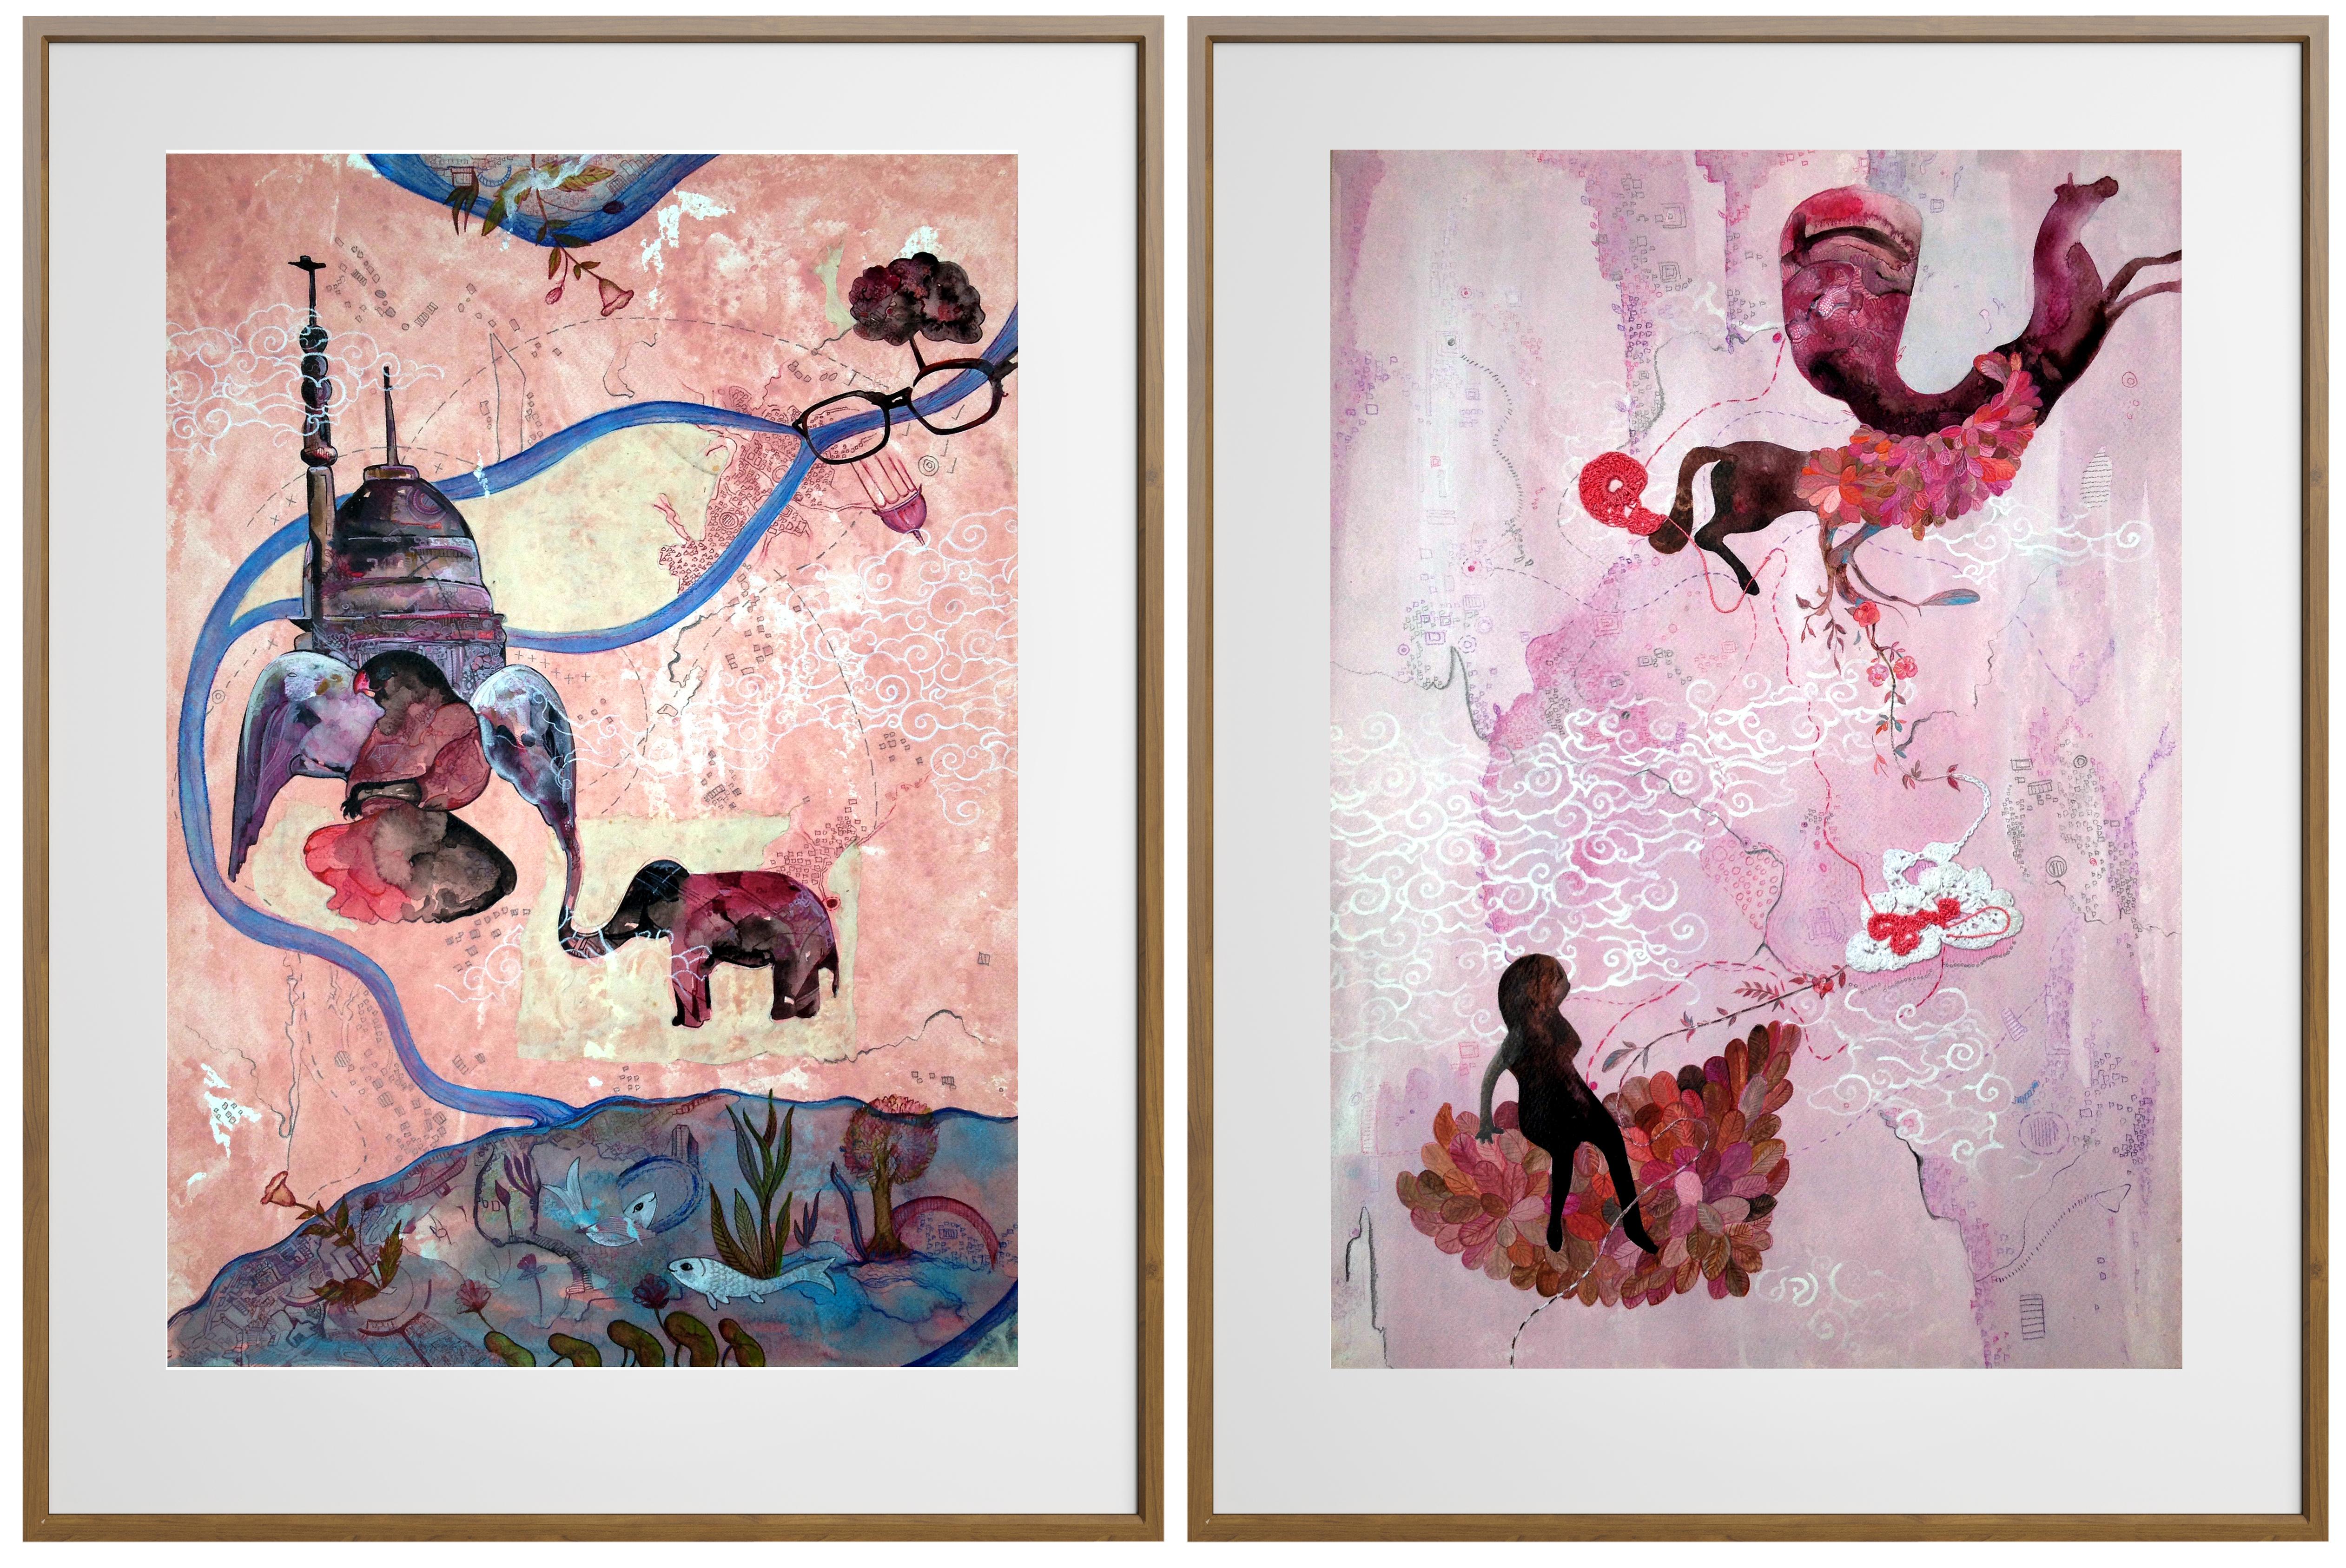 Ritu Sinha Figurative Painting - "Desire" - Framed Contemporary Diptych of India w/ Elephant in Pink + Grey